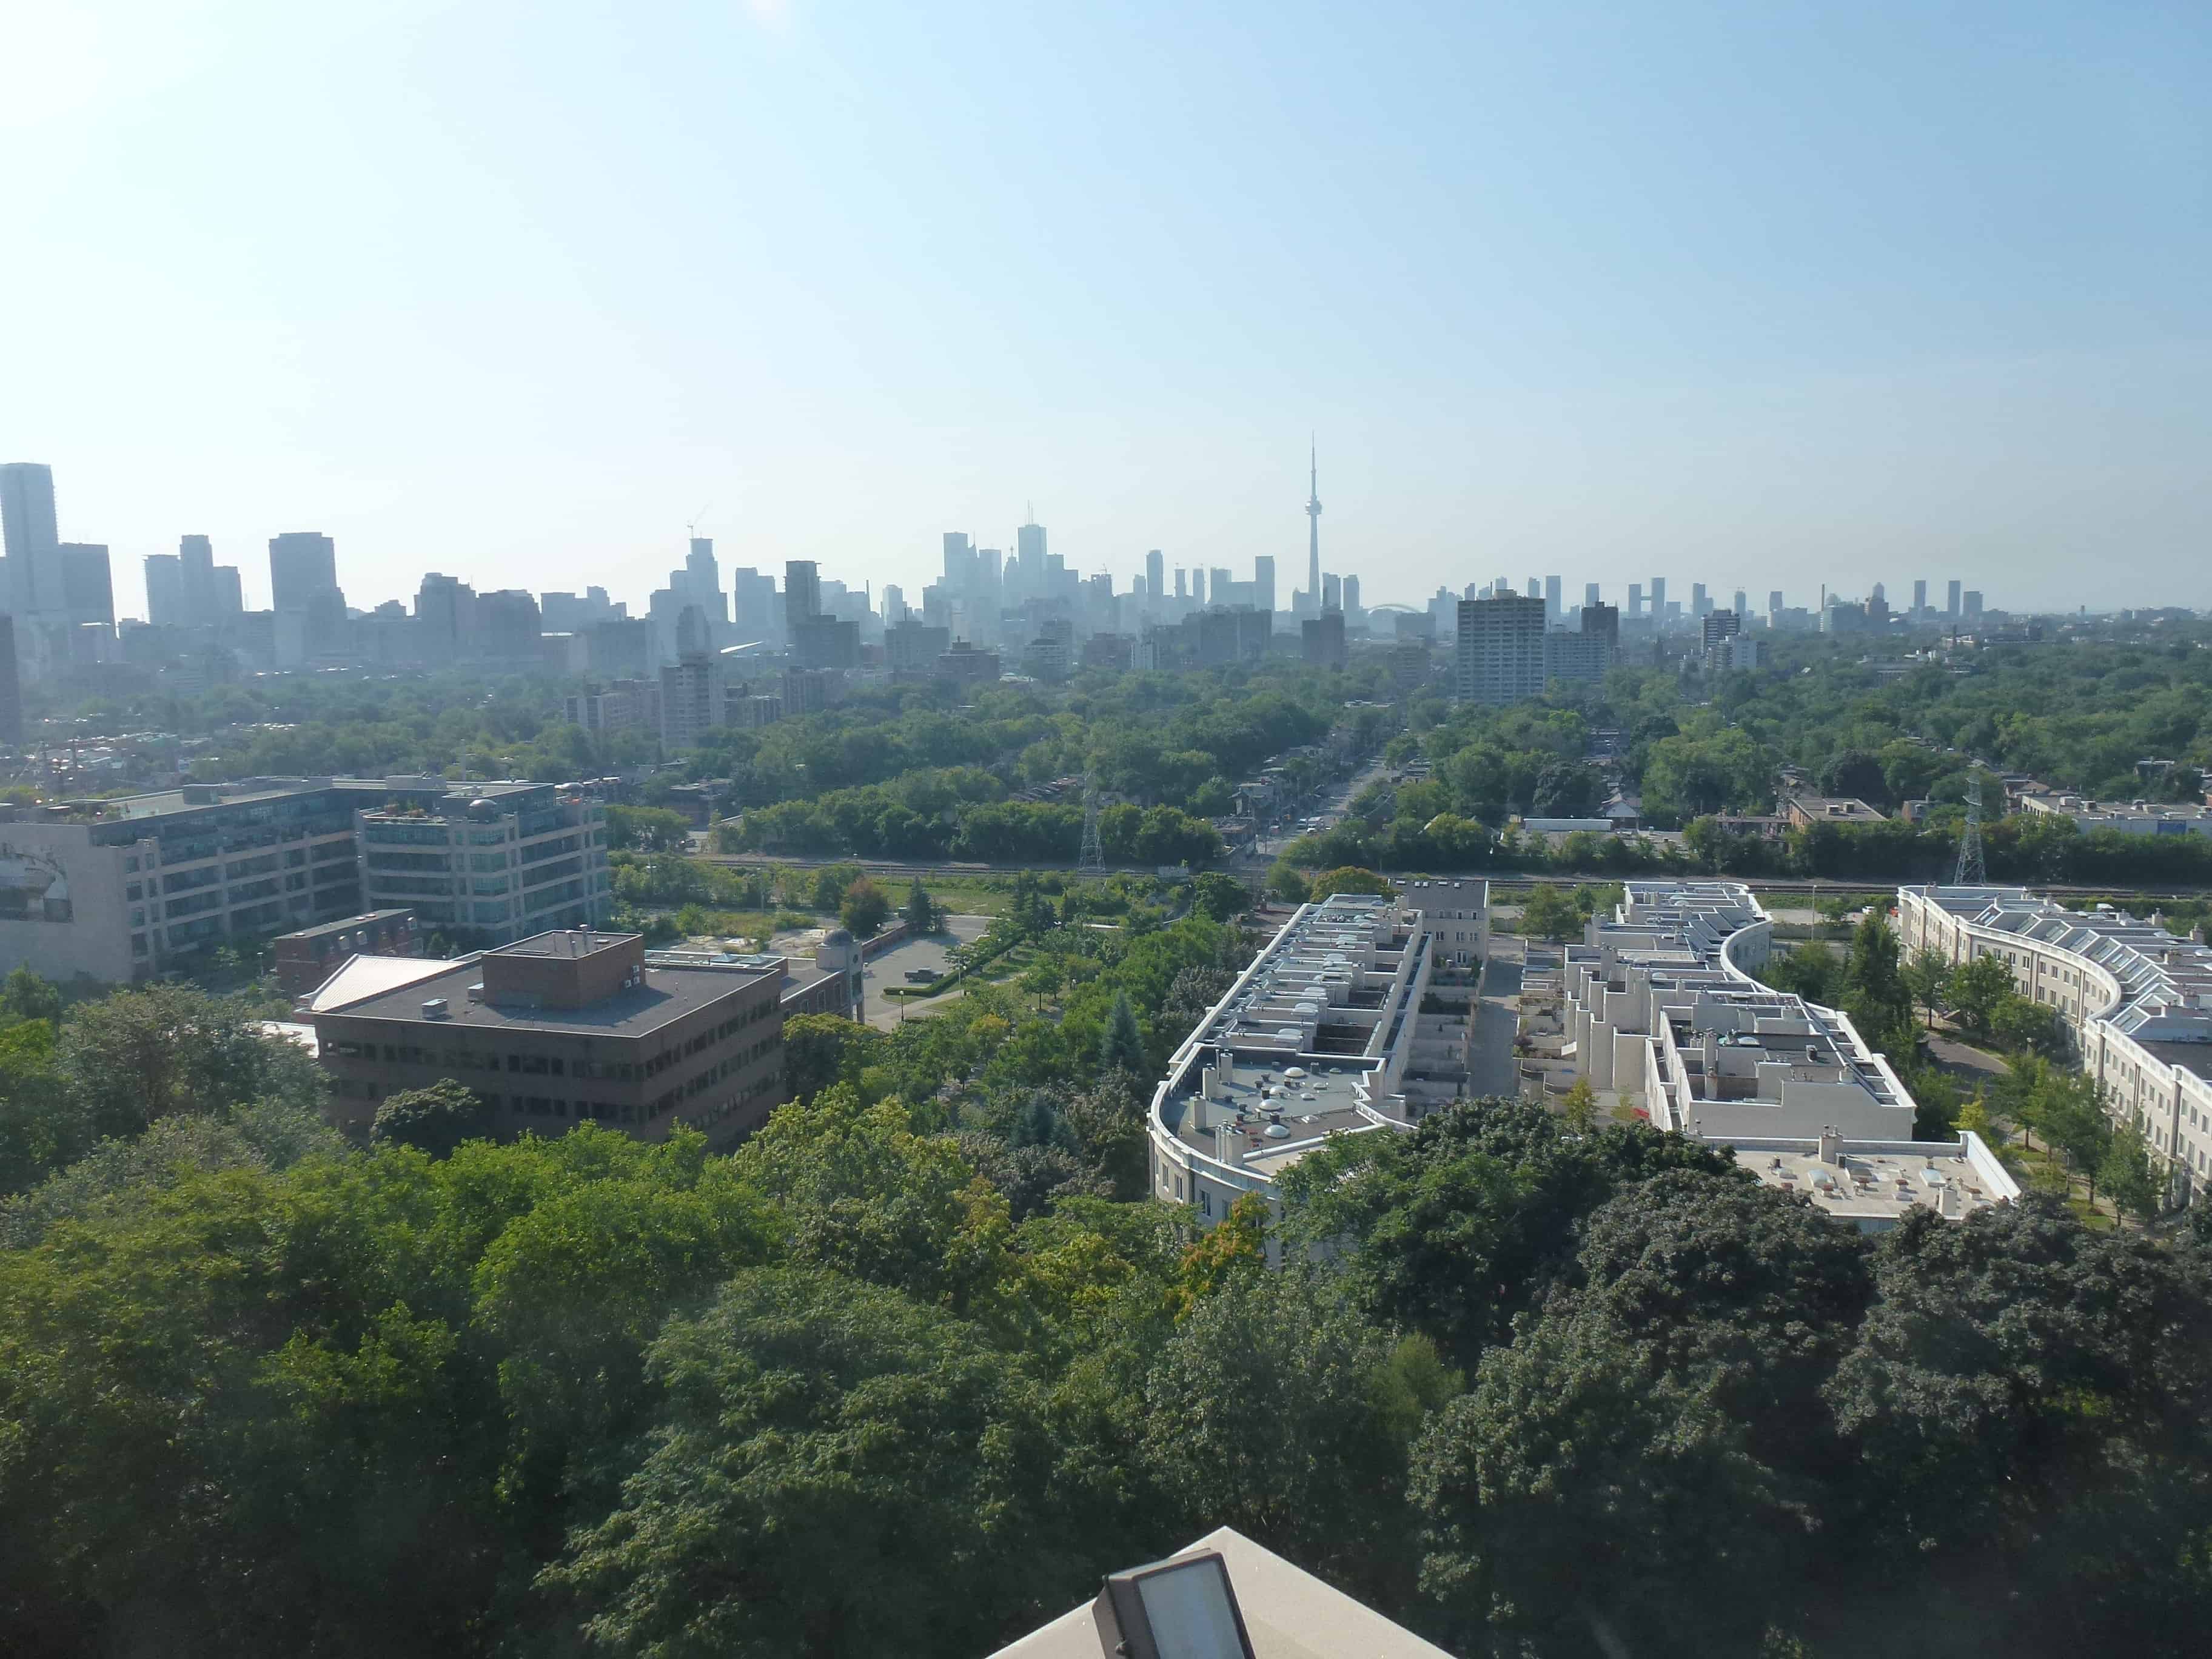 View from the tower at Casa Loma in Toronto, Ontario, Canada